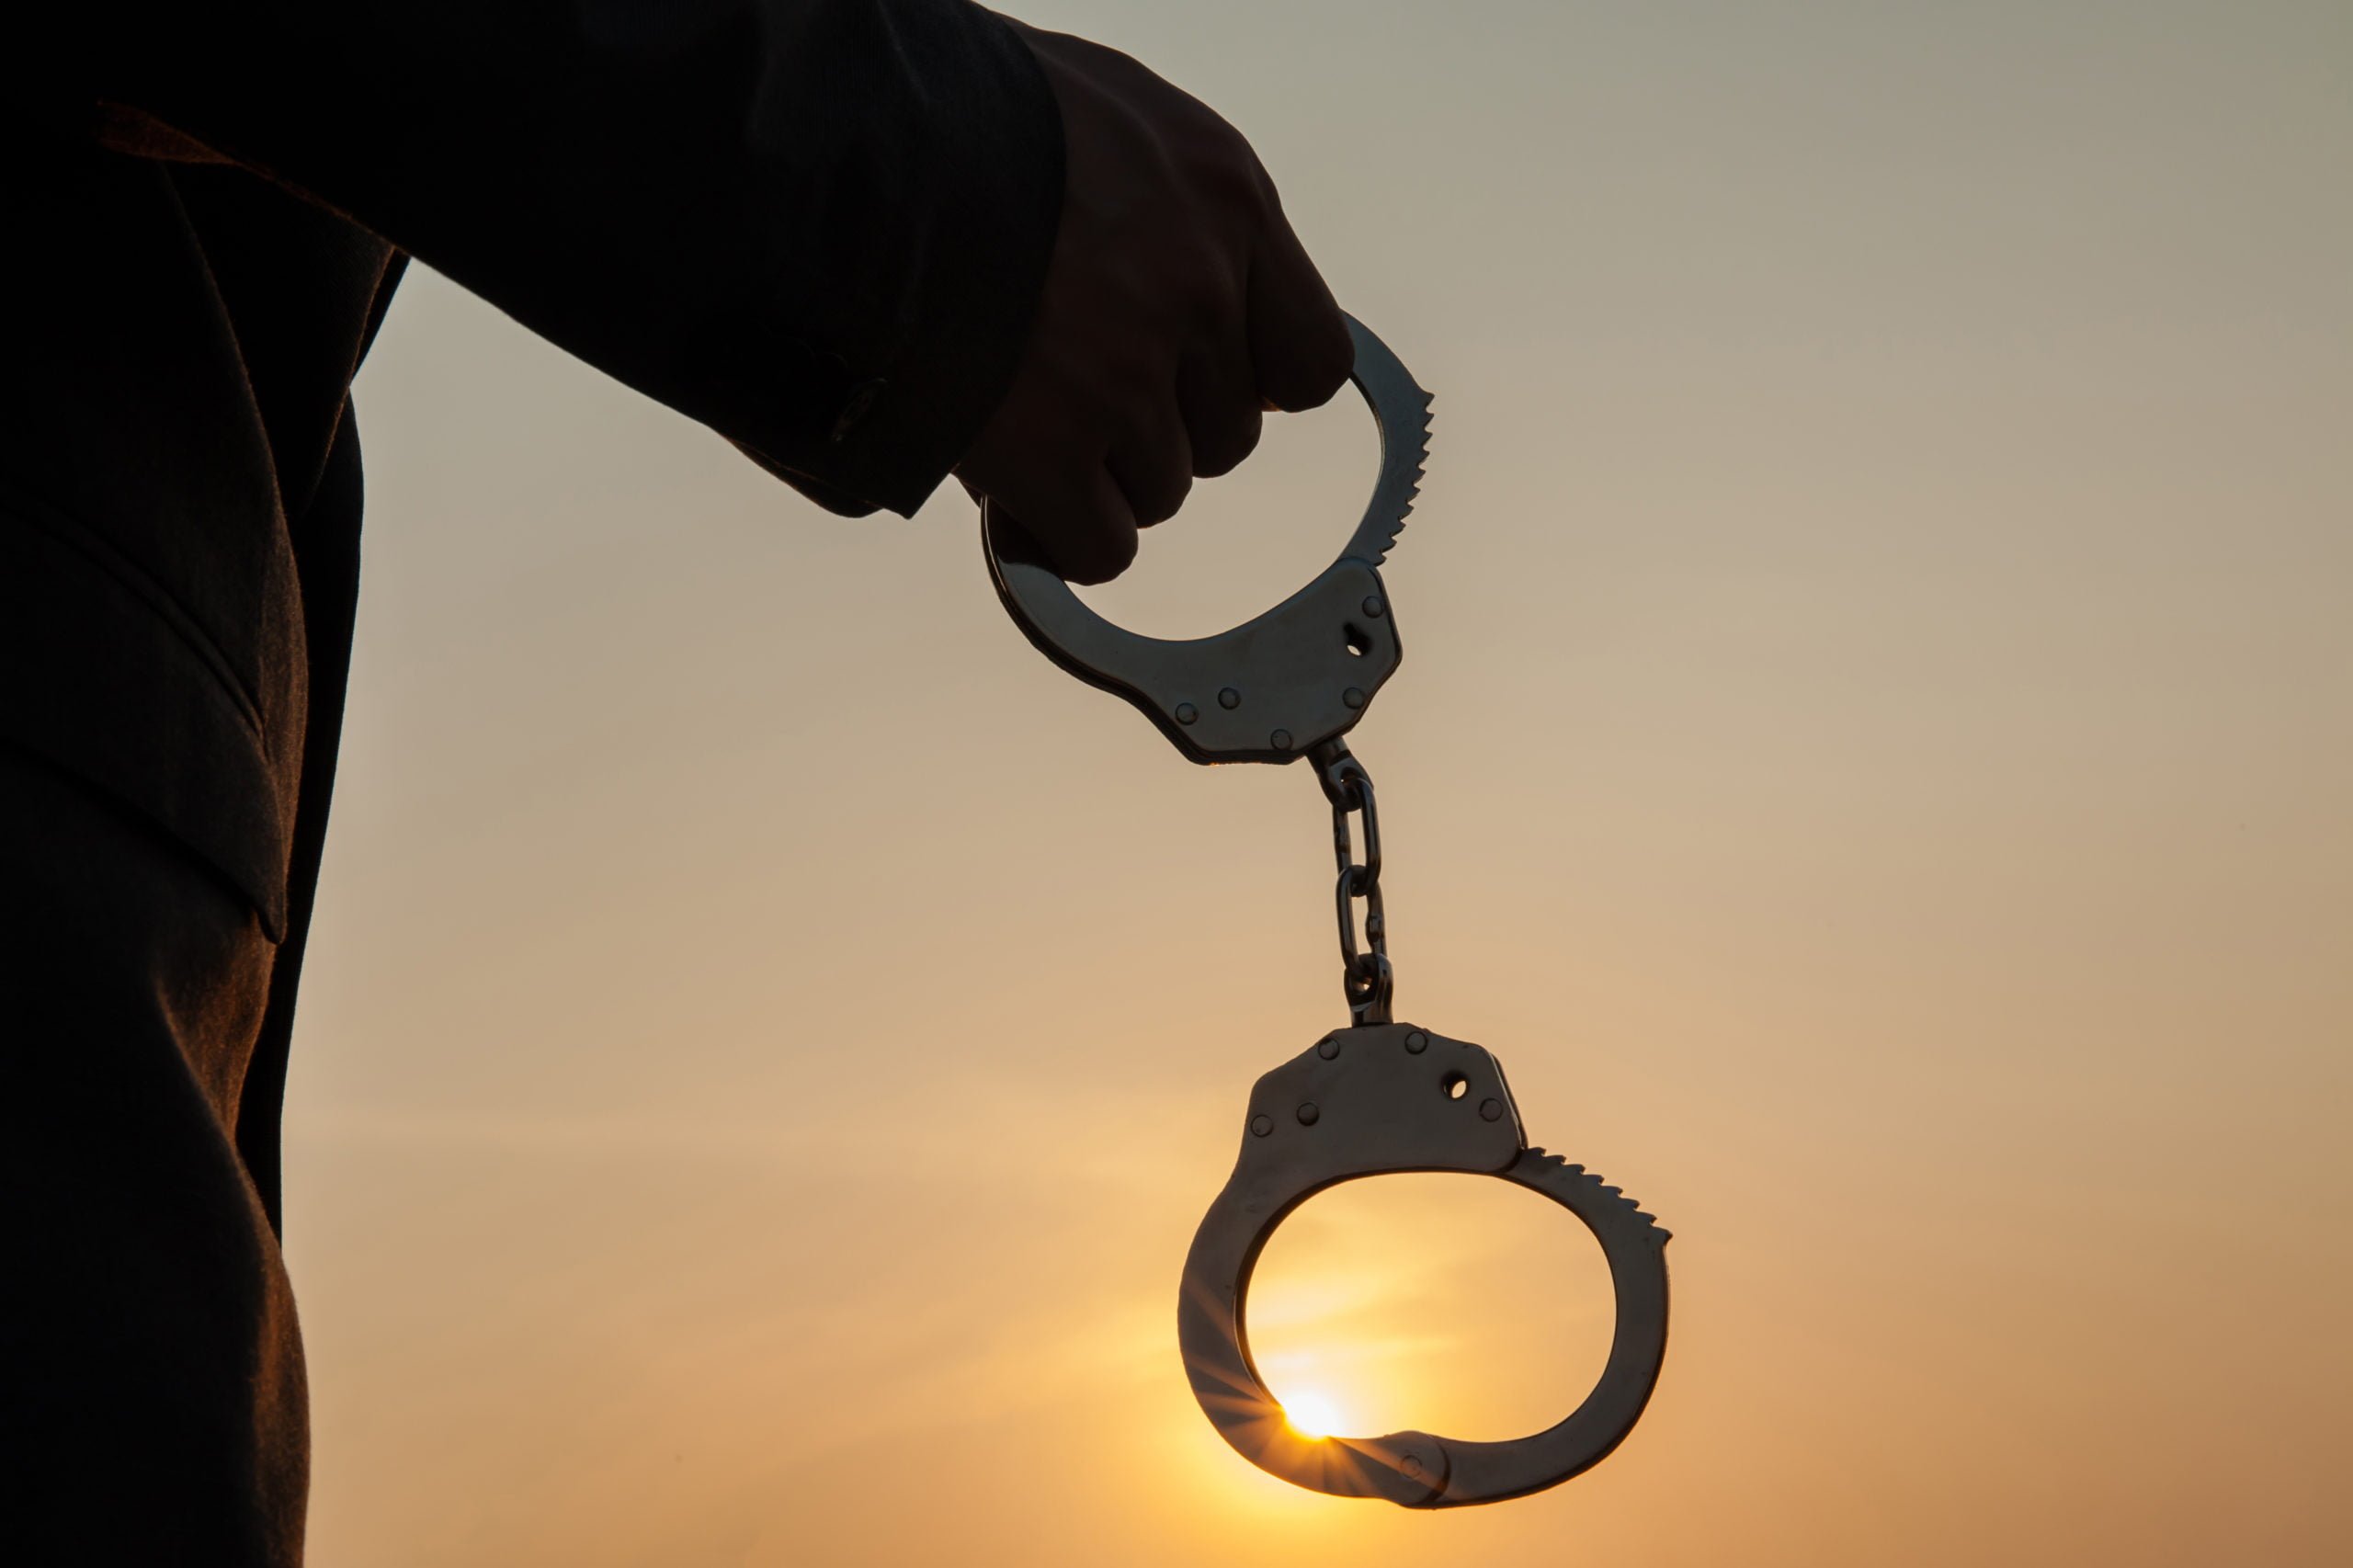 Business Man holding handcuffs after releasing over sunset background